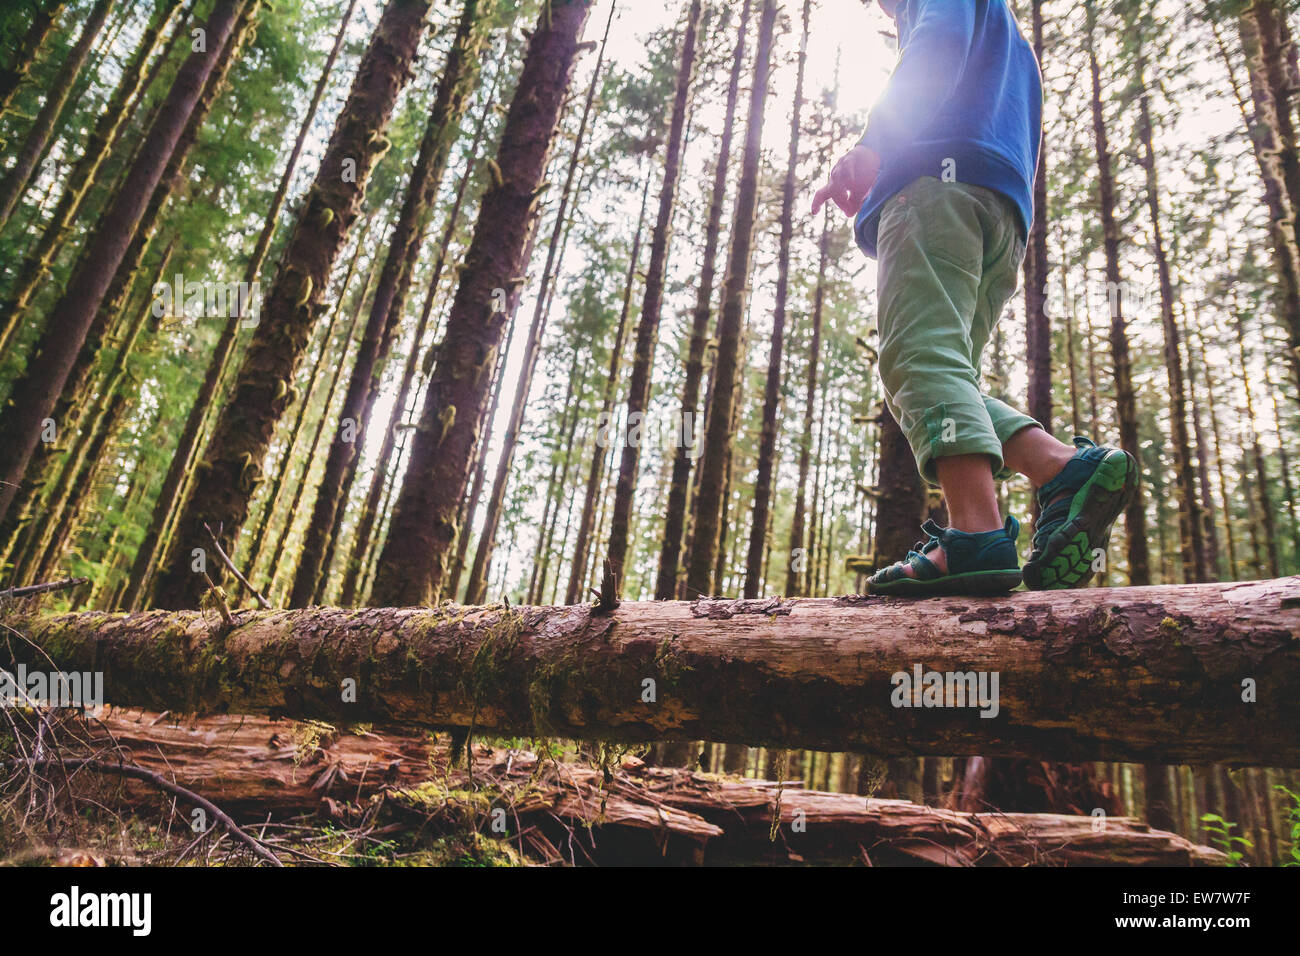 Low angle view of a boy walking across a tree trunk in the forest, USA Stock Photo